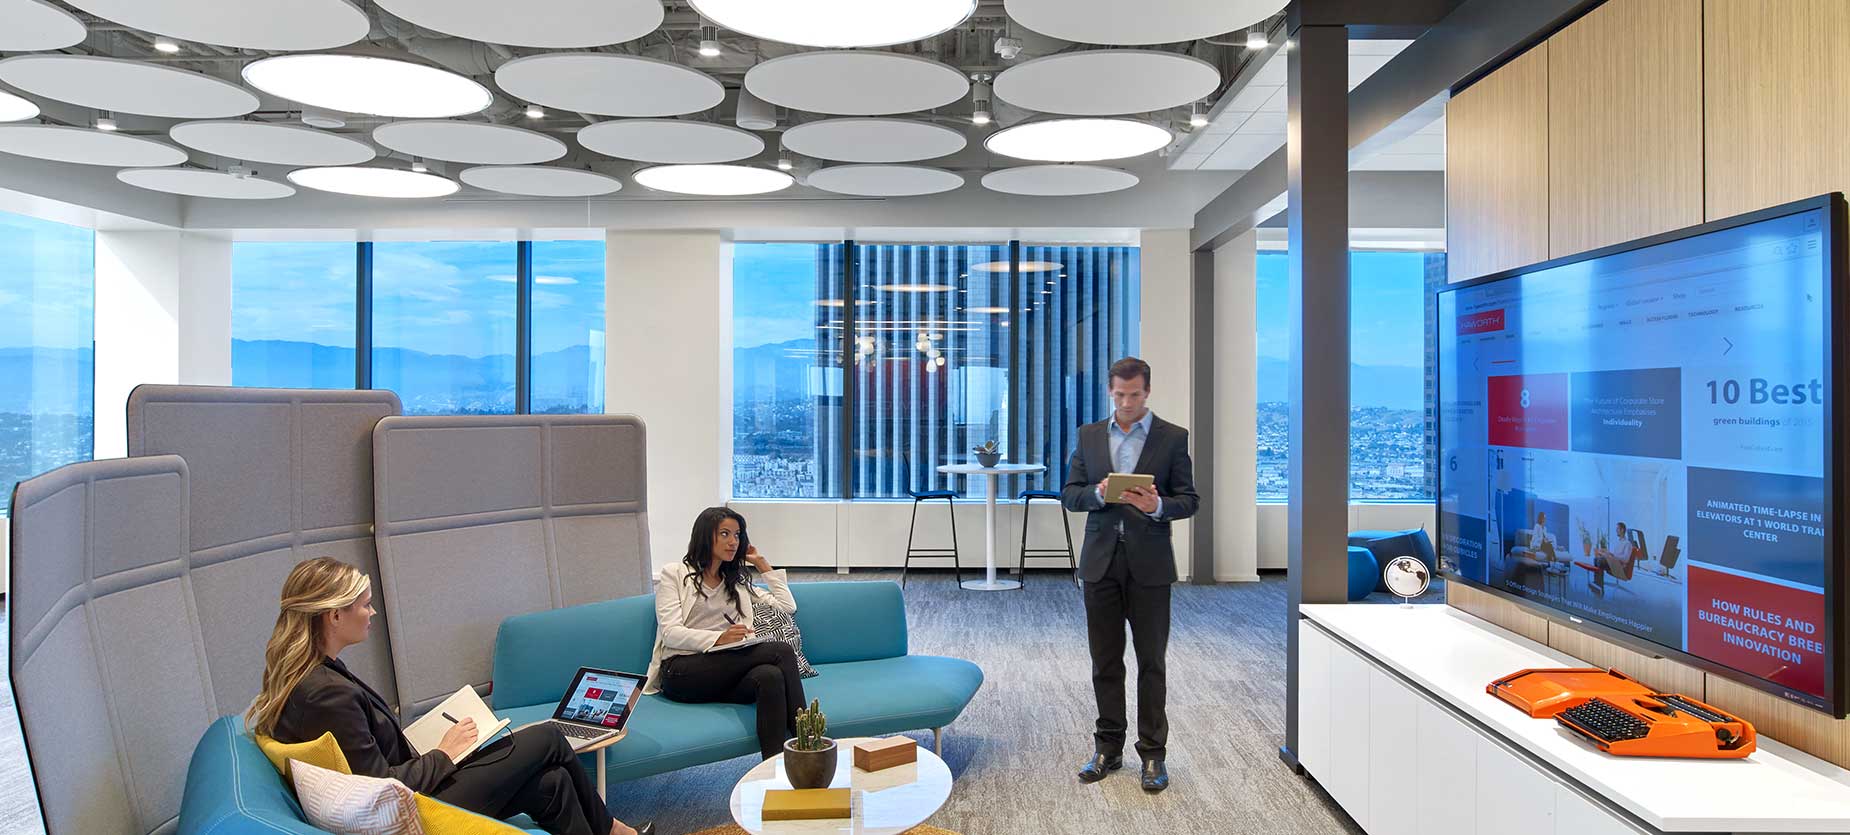 Informal meeting spaces in an open office environment are a great way to activate a workplace or kick off a meeting. Lighter scaled furniture and adjacent open space, centered on technology, provide flexibility to grow or contract seating as needed to accommodate various meeting sizes and postures.